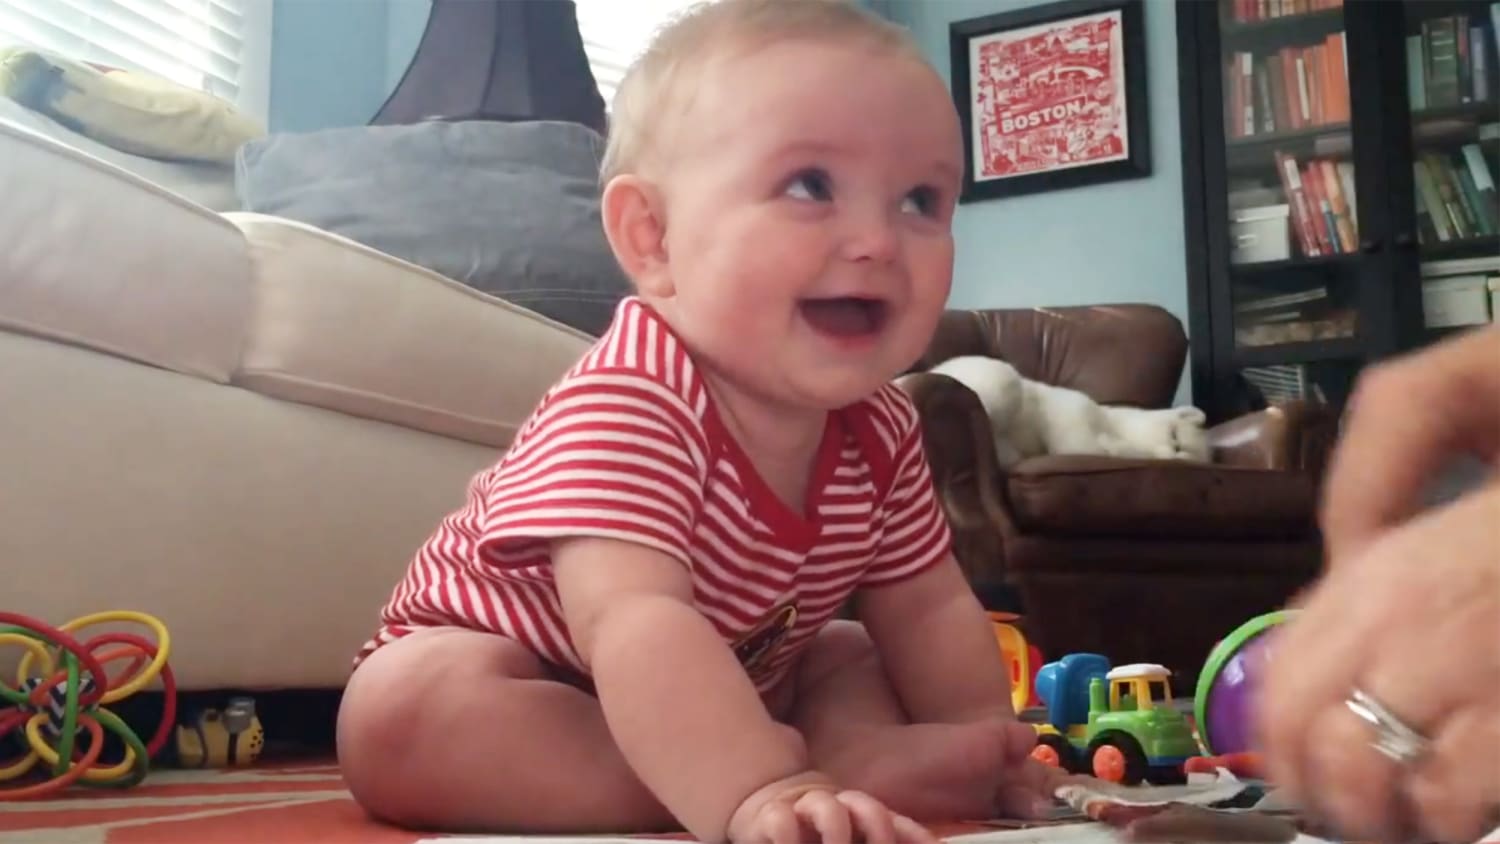 Viral video shows baby laughing when parents tear catalog